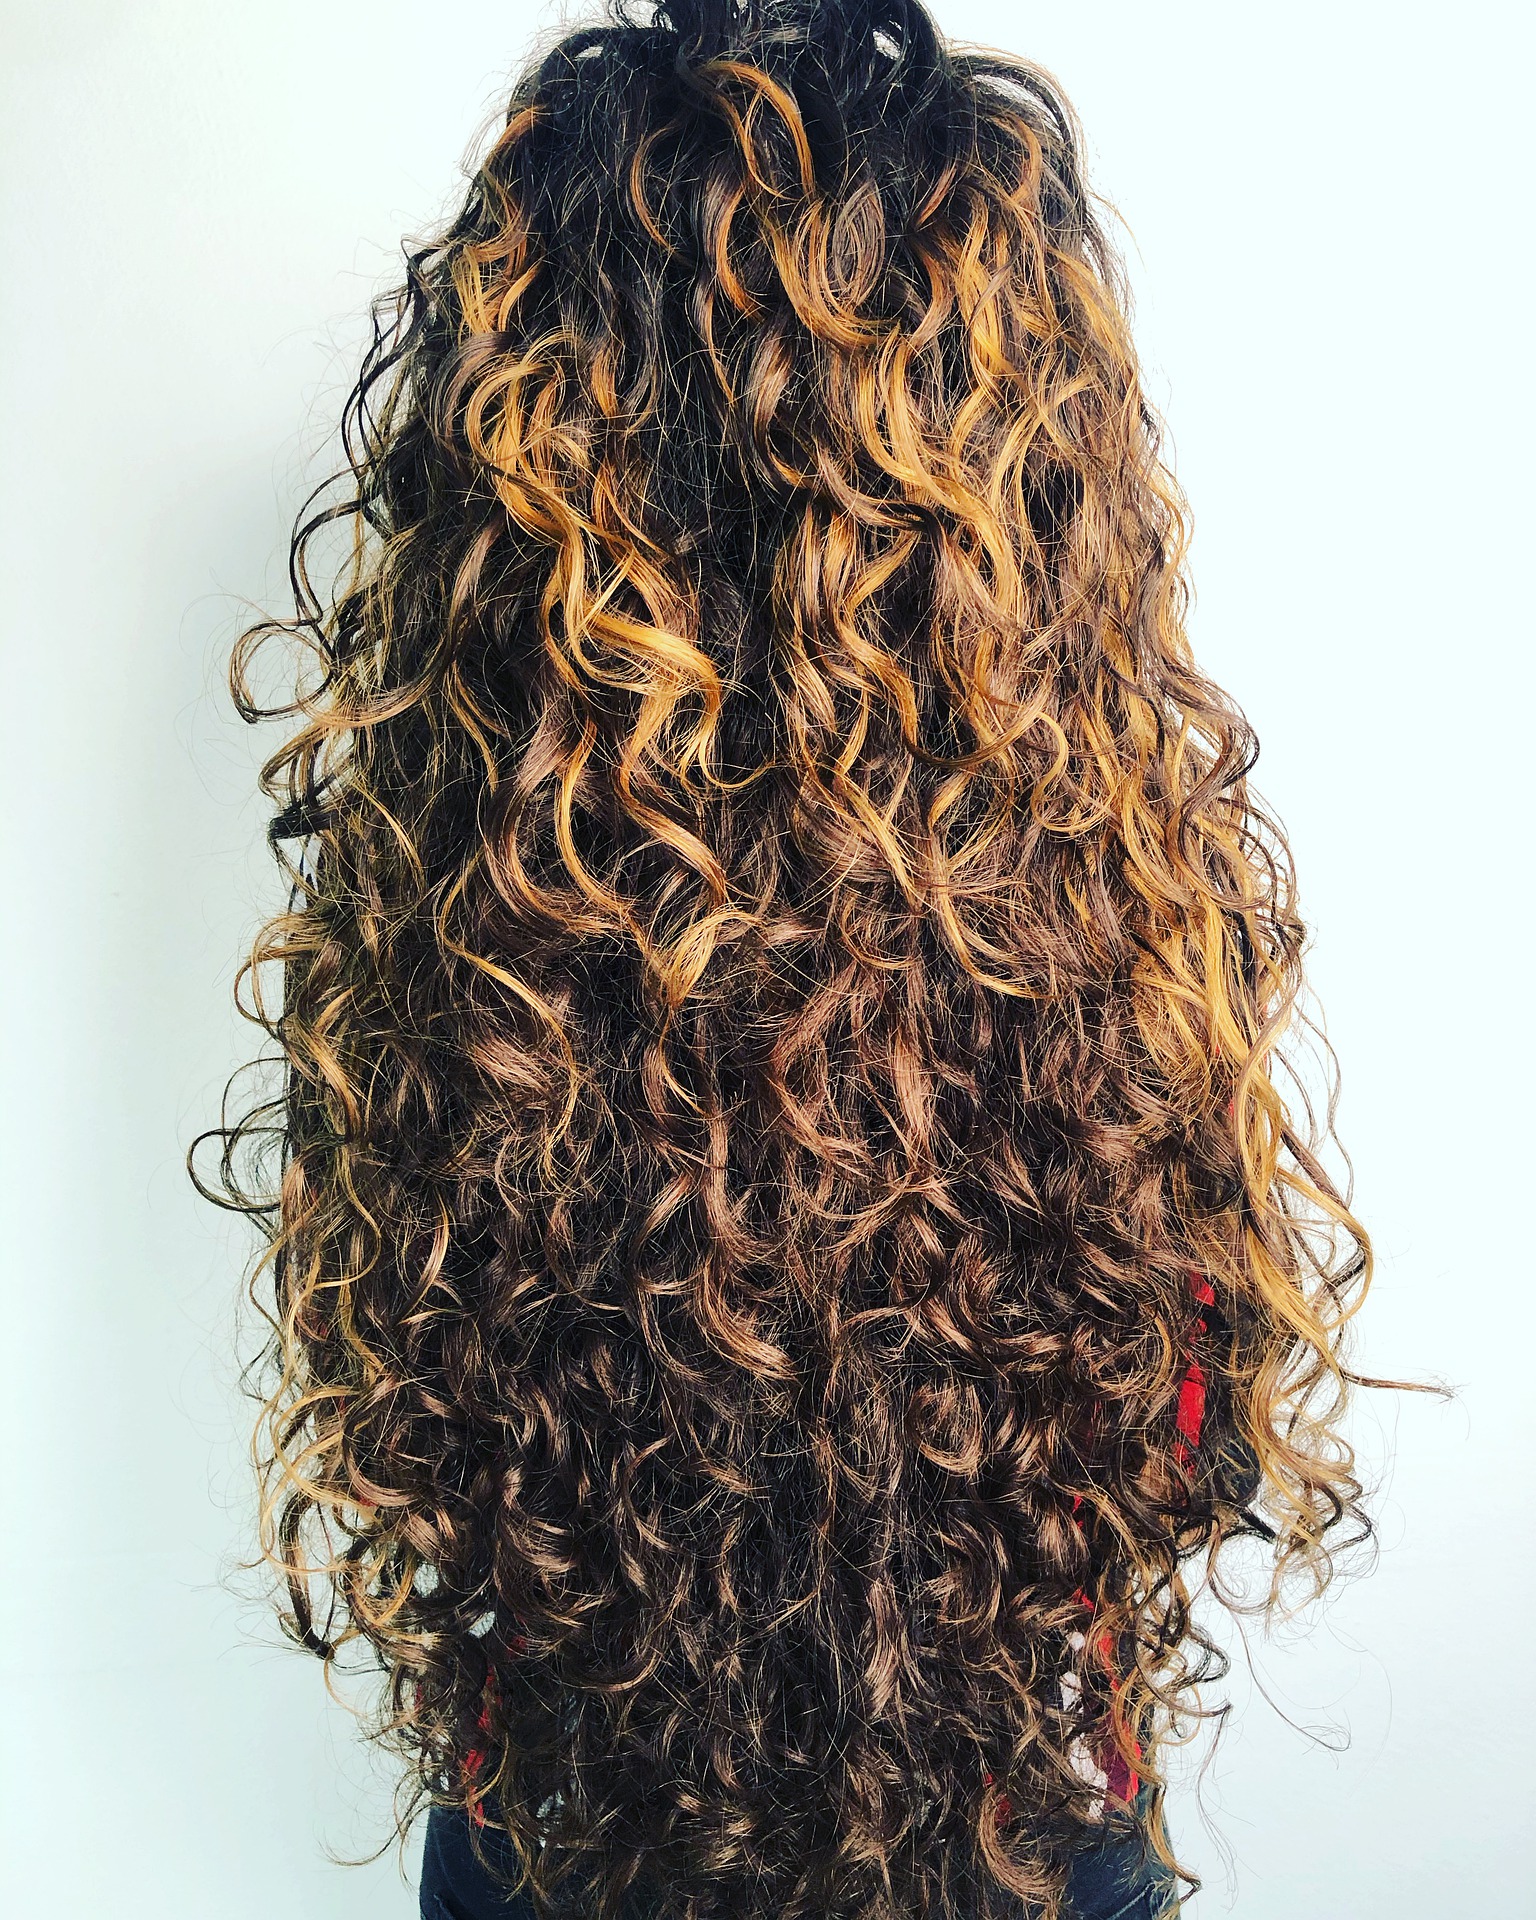 curly-5341879_1920